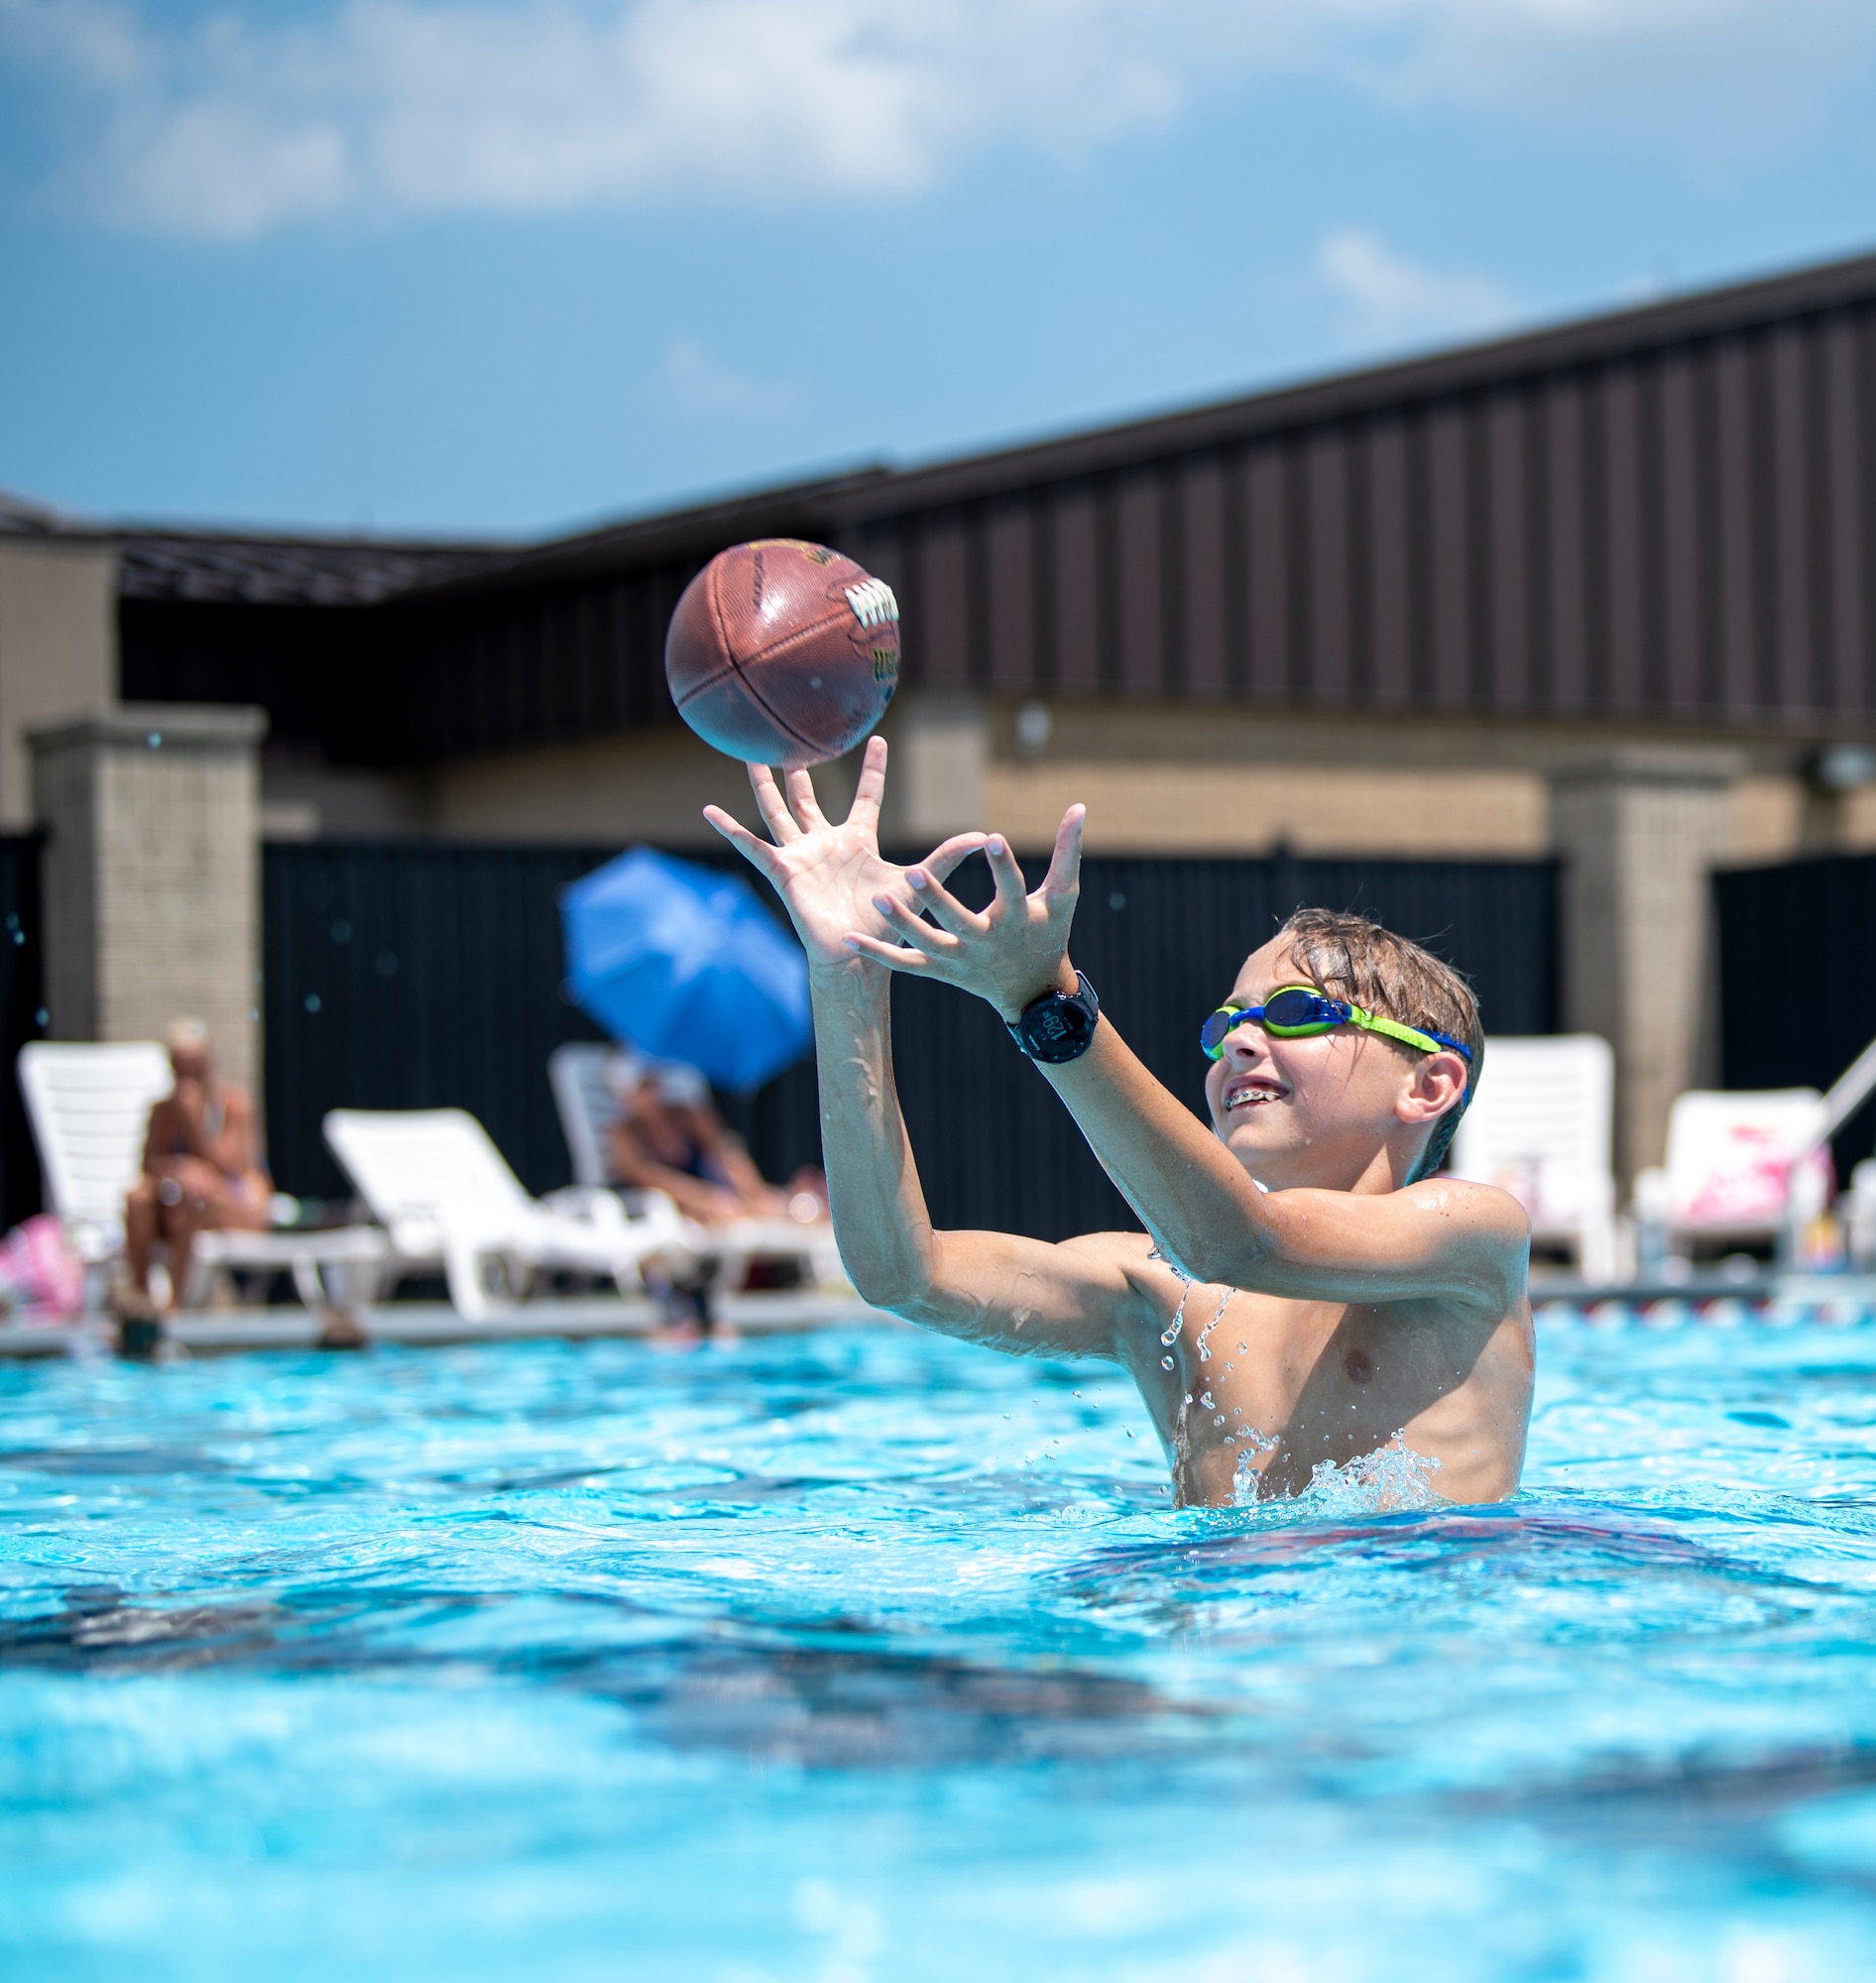 Parker Evans, son of Tech. Sgt. Jason Evans, 436th Civil Engineer Squadron explosive ordnance disposal, catches a football at the Oasis Pool at Dover Air Force Base, Del., July 14, 2021. During summer break, the pool is open 11 am to 7 pm daily for military members, family and friends. The pool no longer has block sessions for attendees, but has a capacity limit of 200 people.  (U.S. Air Force photo by Tech. Sgt. Nicole Leidholm)